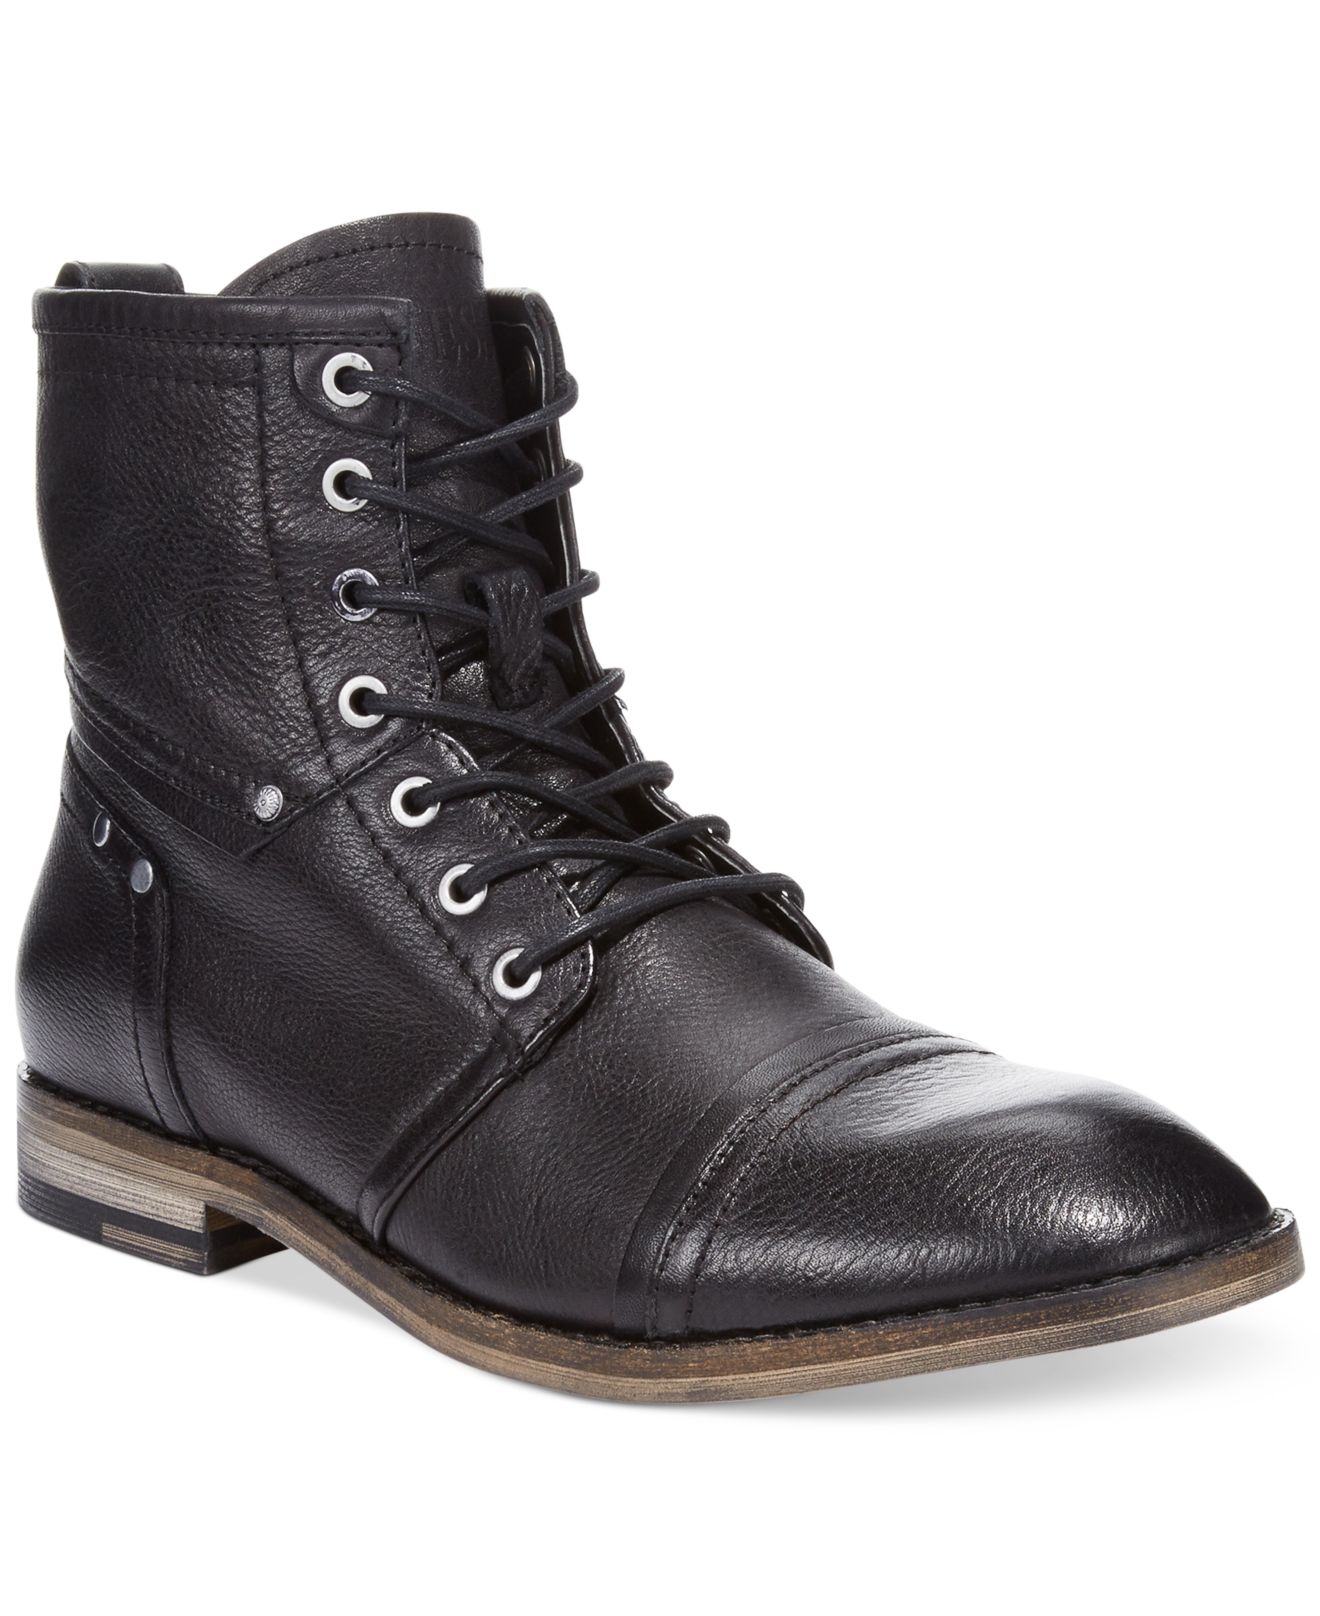 Guess Eagan Cap-toe Boots in Black for Men - Save 10% | Lyst